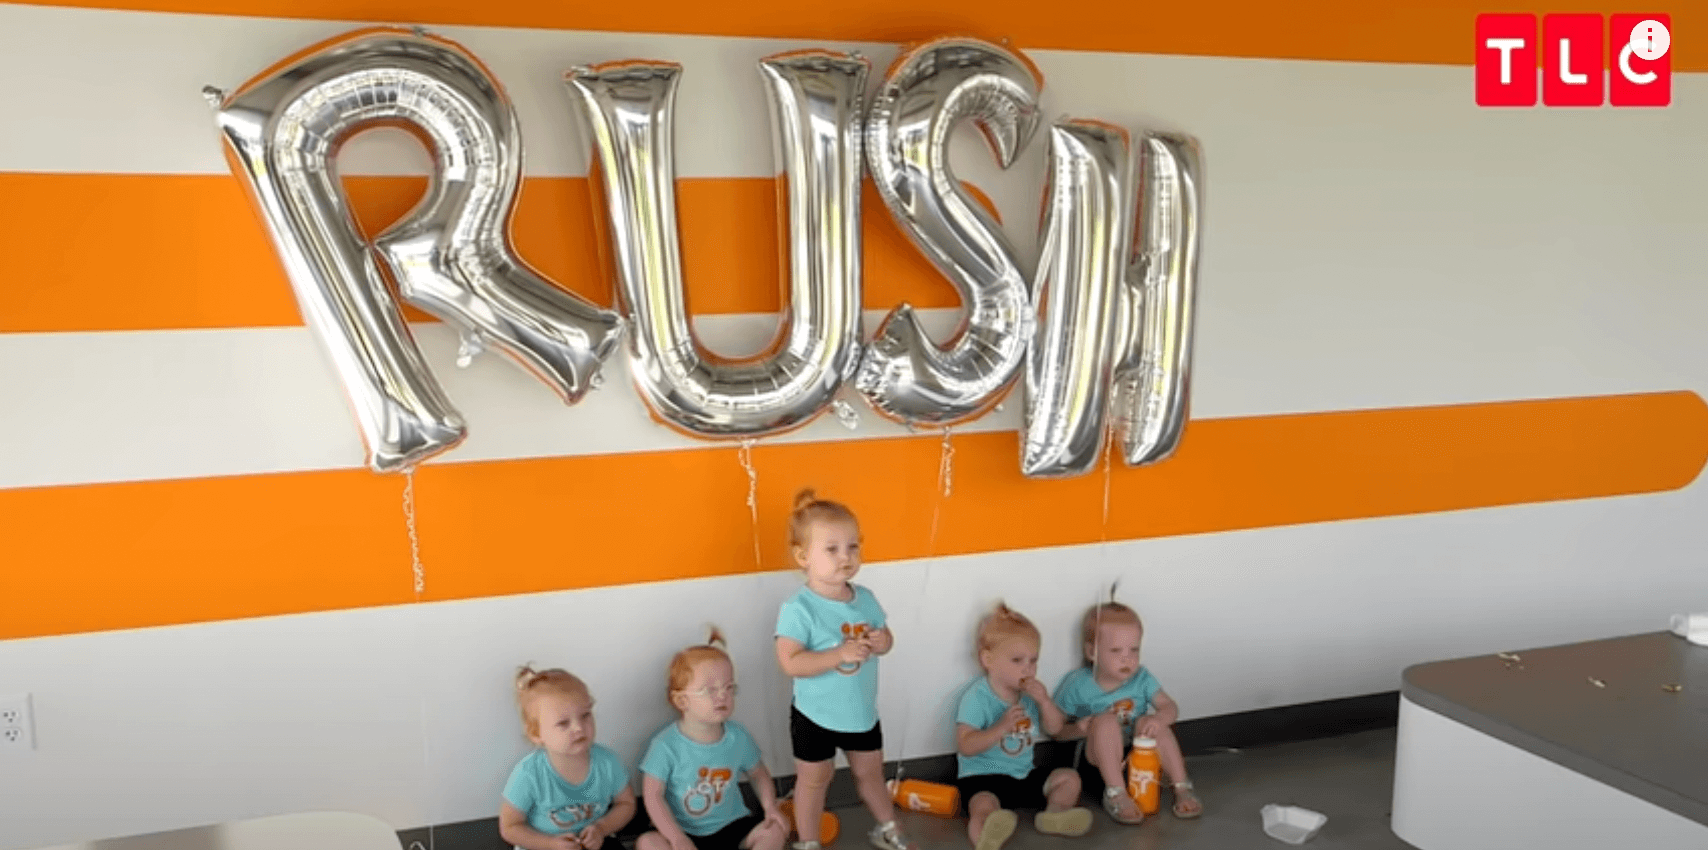 The Busby Quints posing for a photo in the family's cycling studio in 'OutDaughtered'